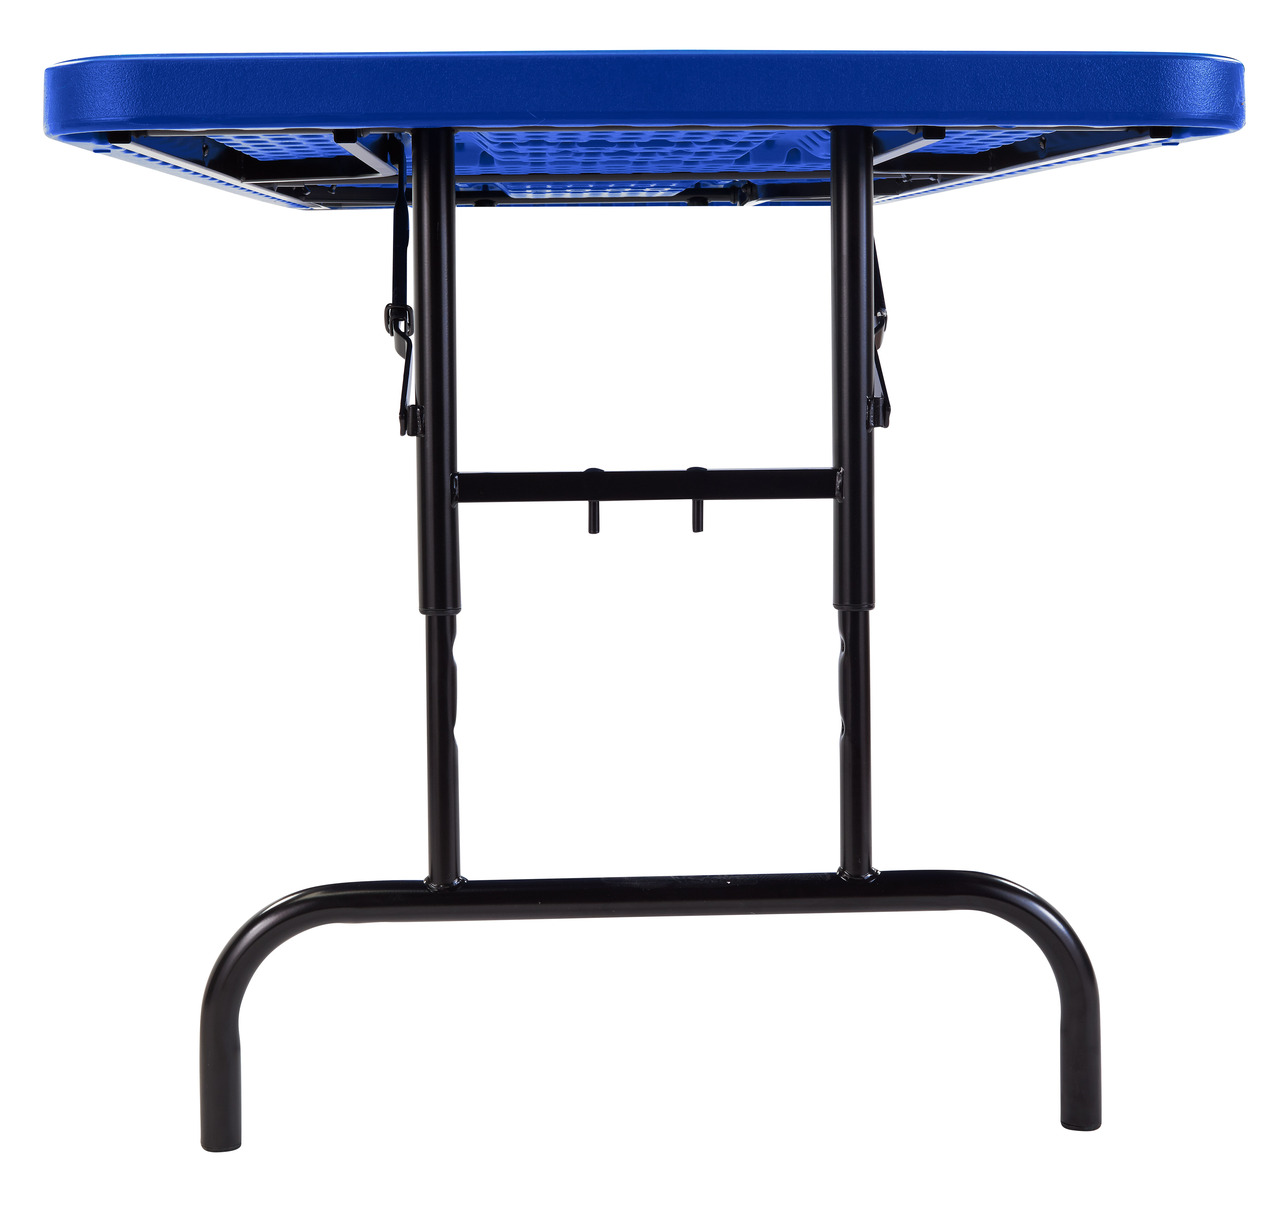 NPS 30" x 72" Height Adjustable Heavy Duty Folding Table - Blue Top and Black Frame